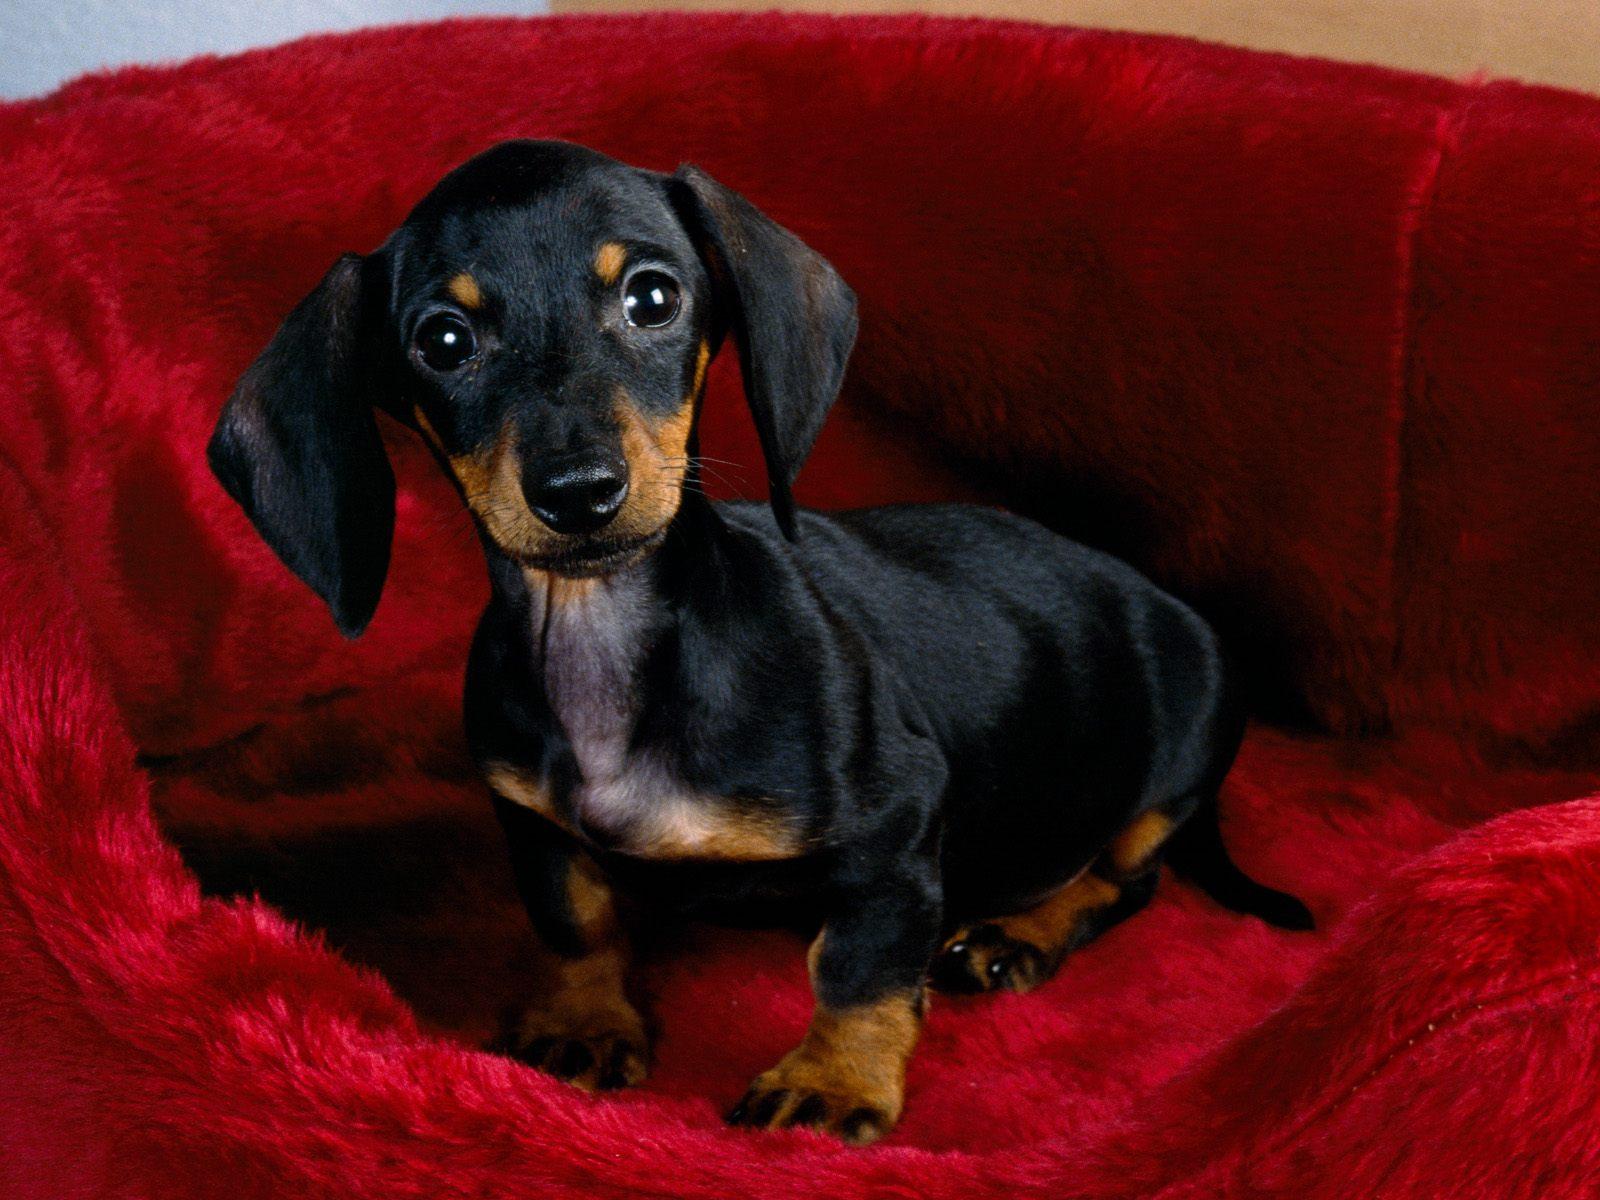 Dachshund dog in a red basket photo and wallpaper. Beautiful